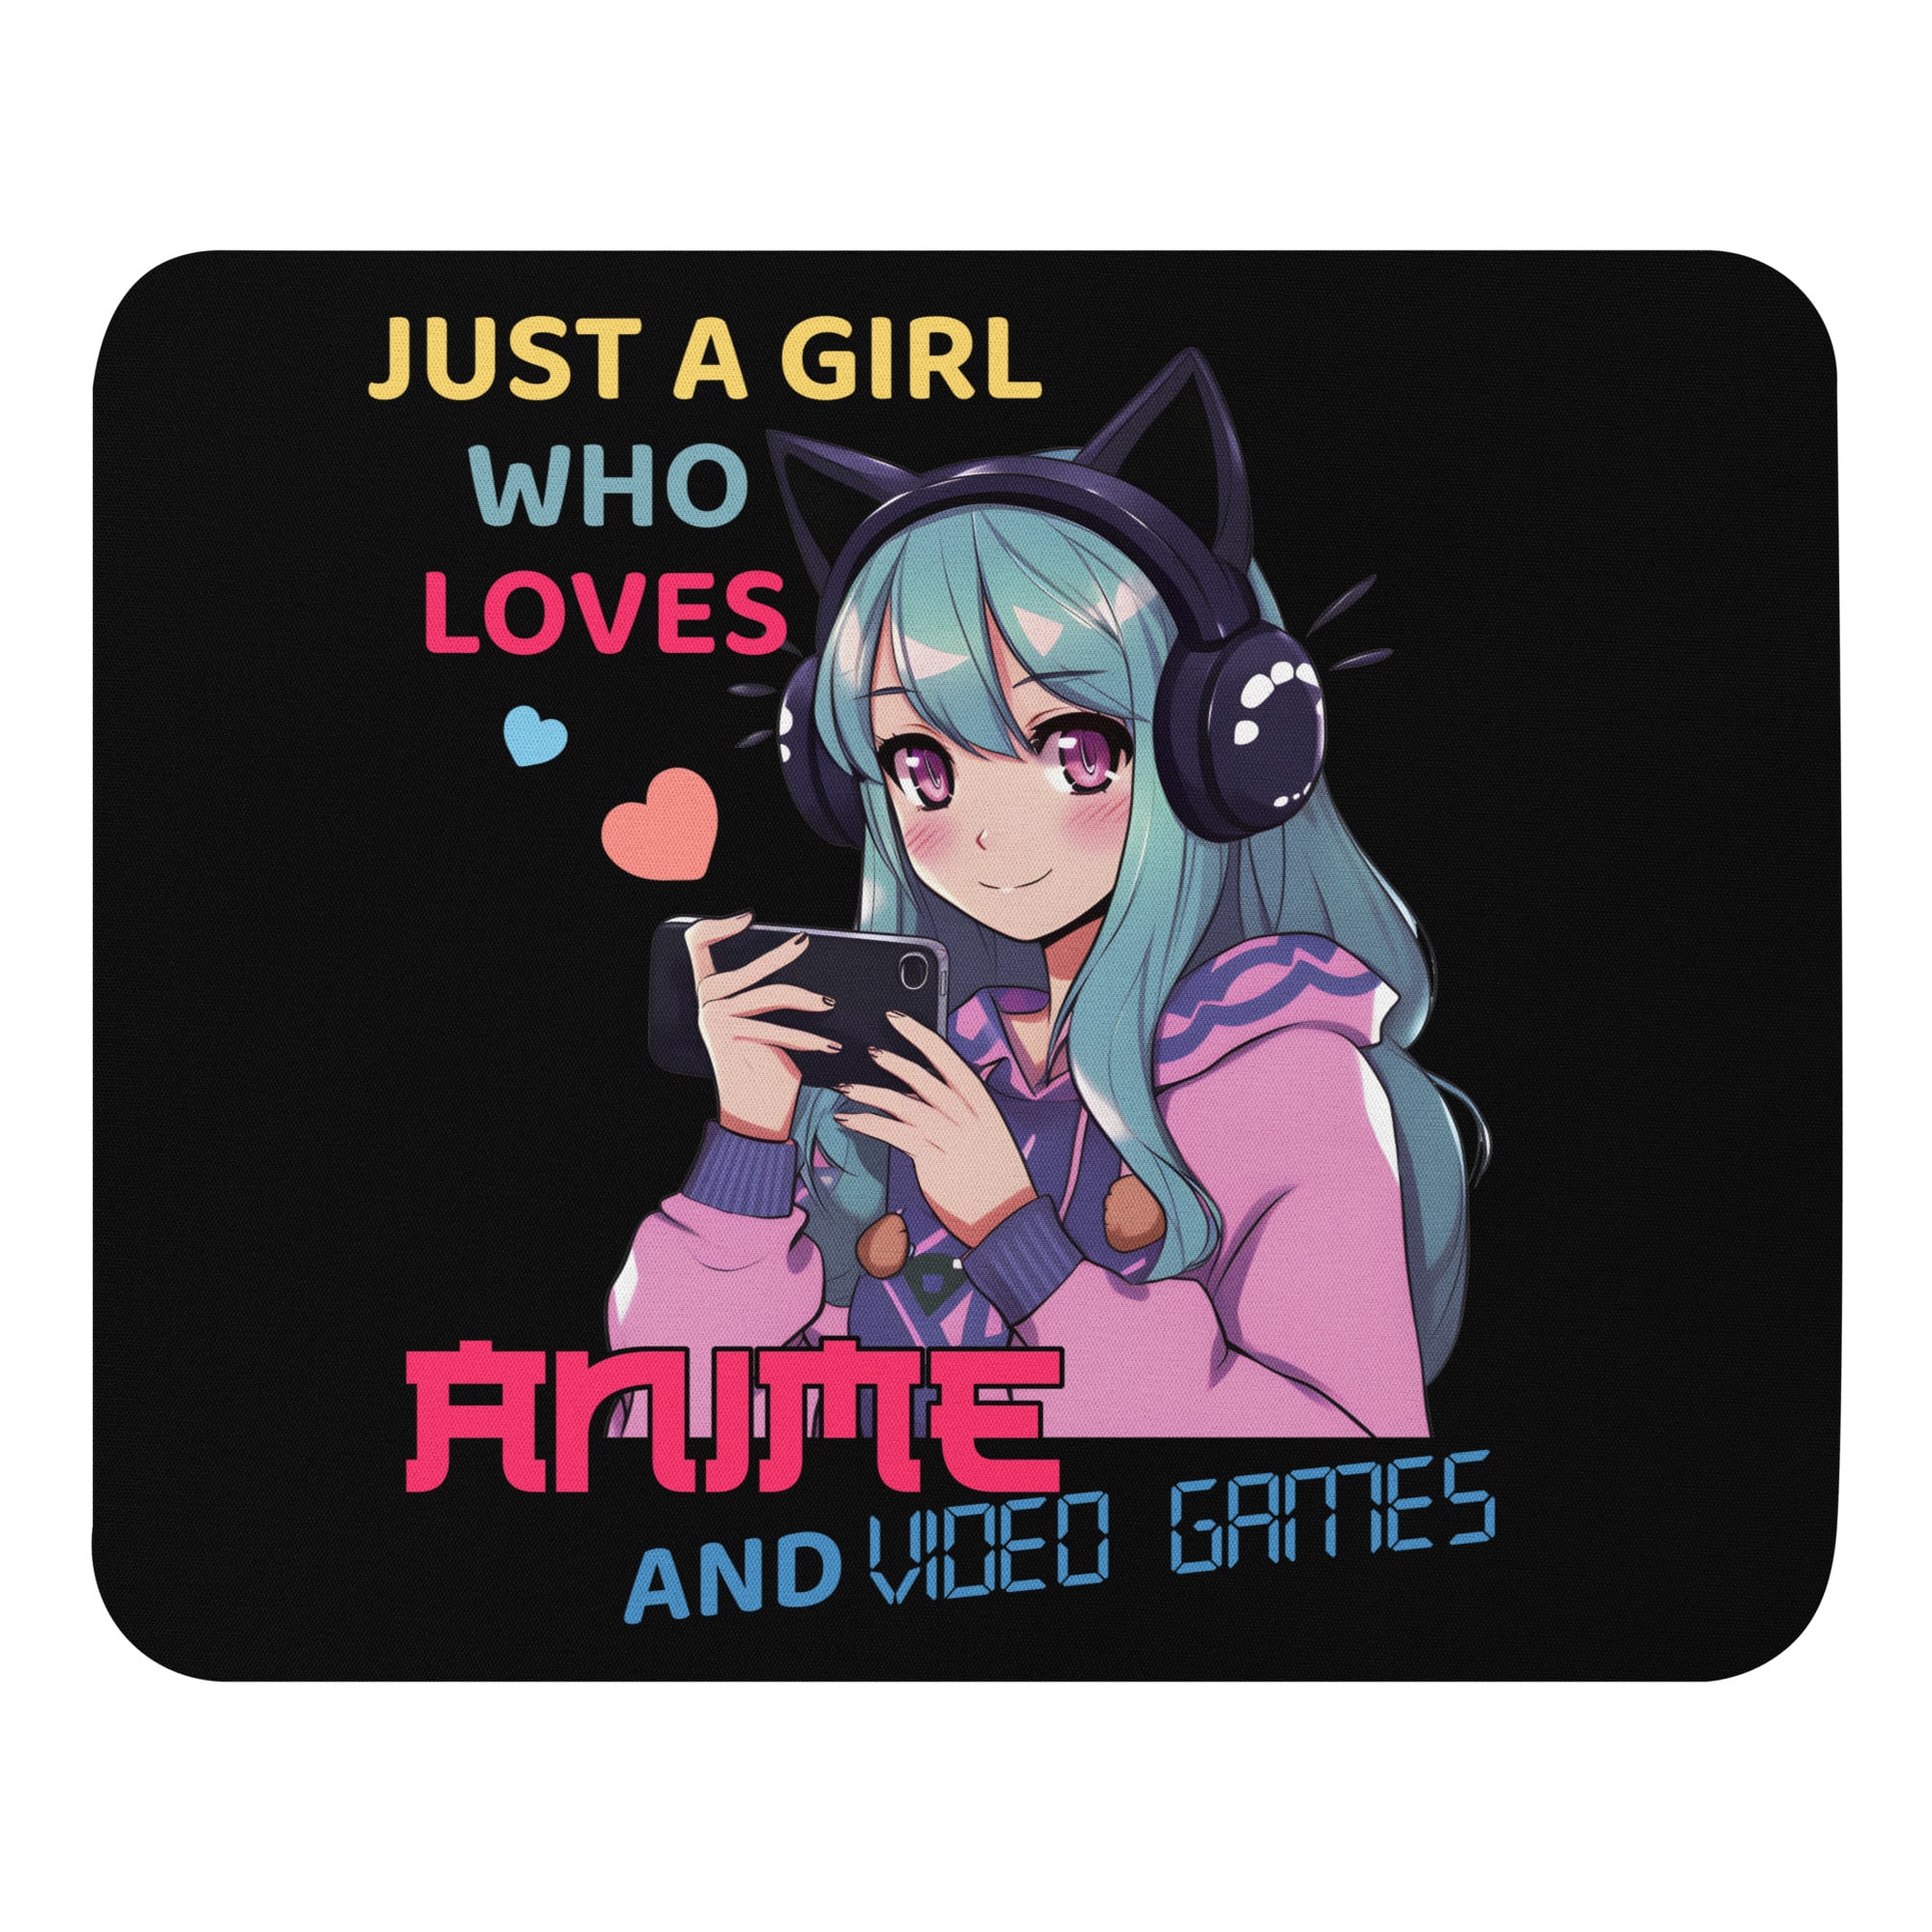 Anime And Video Games Girl Mouse Pad Anime mouse pad Video game girl mouse pad Gaming anime mouse pad Cute anime mouse pad Anime girl gaming pad Gamer girl mouse pad Anime and gaming mouse pad Cute gaming mouse pad Anime-themed mouse pad Girl gamer mouse pad Video game store Gaming merchandise Gaming accessories shop Online gaming store Video game shop near me Gaming console store PC gaming store Gaming gear shop Retro gaming shop Board game shop Anime merchandise Anime store online Japanese anime shop Anime figurines Manga shop Anime DVDs Anime accessories Anime apparel Anime collectibles Anime gifts